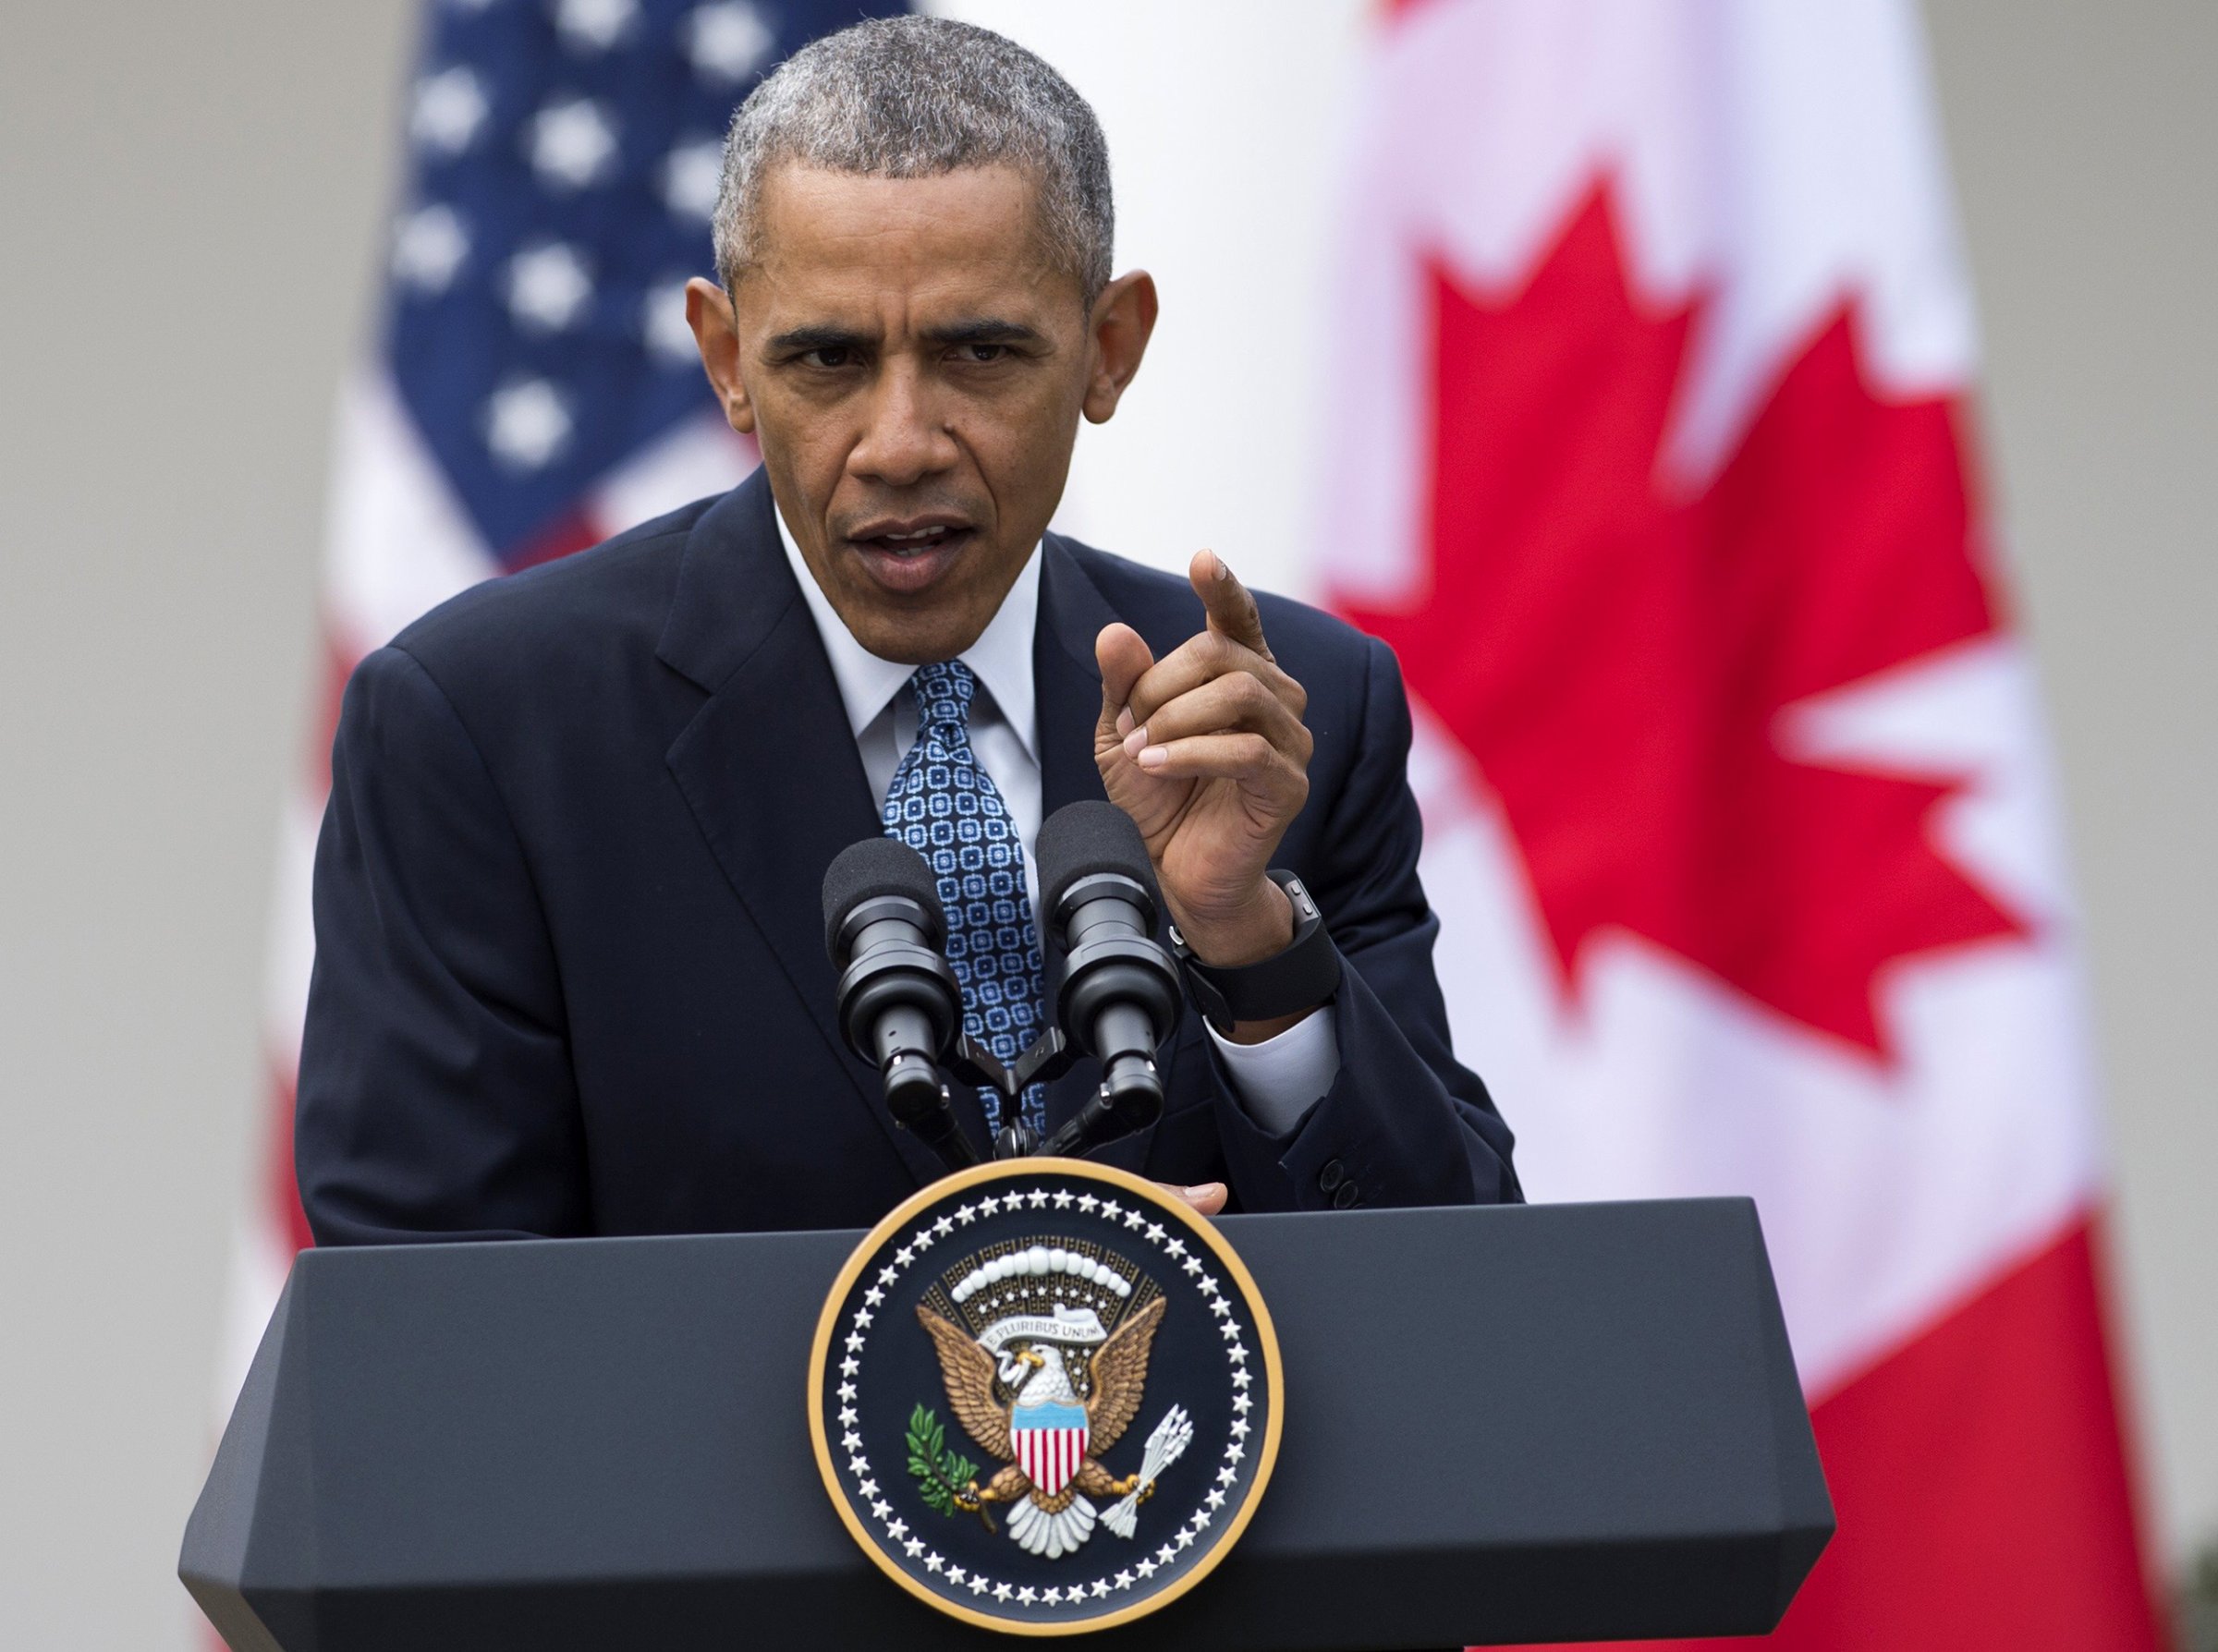 Barack Obama speaks during a press conference with Canadian Prime Minister Justin Trudeau in the Rose Garden of the White House in Washington, DC, on March 10, 2016.